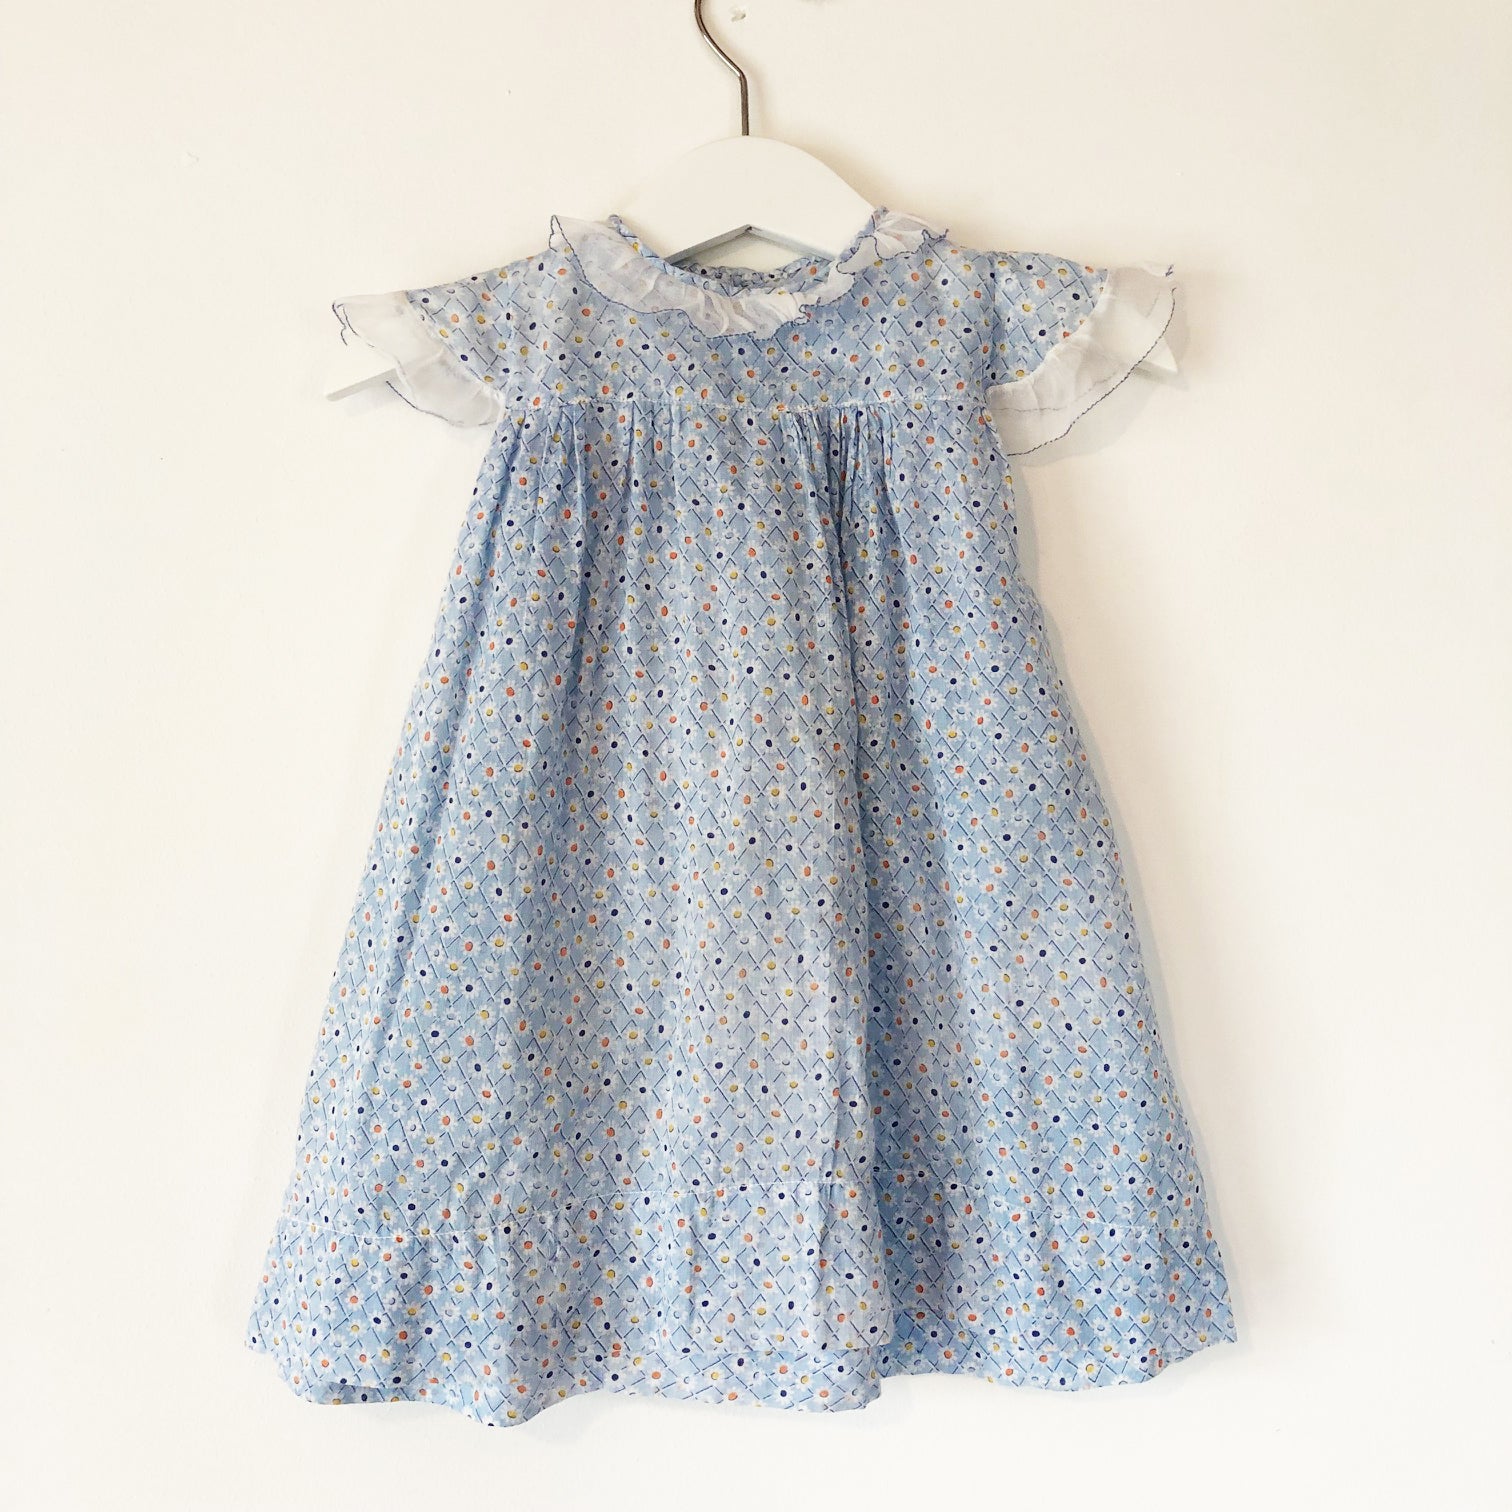 Baby Blue dress with Bloomers Size 6-12 months